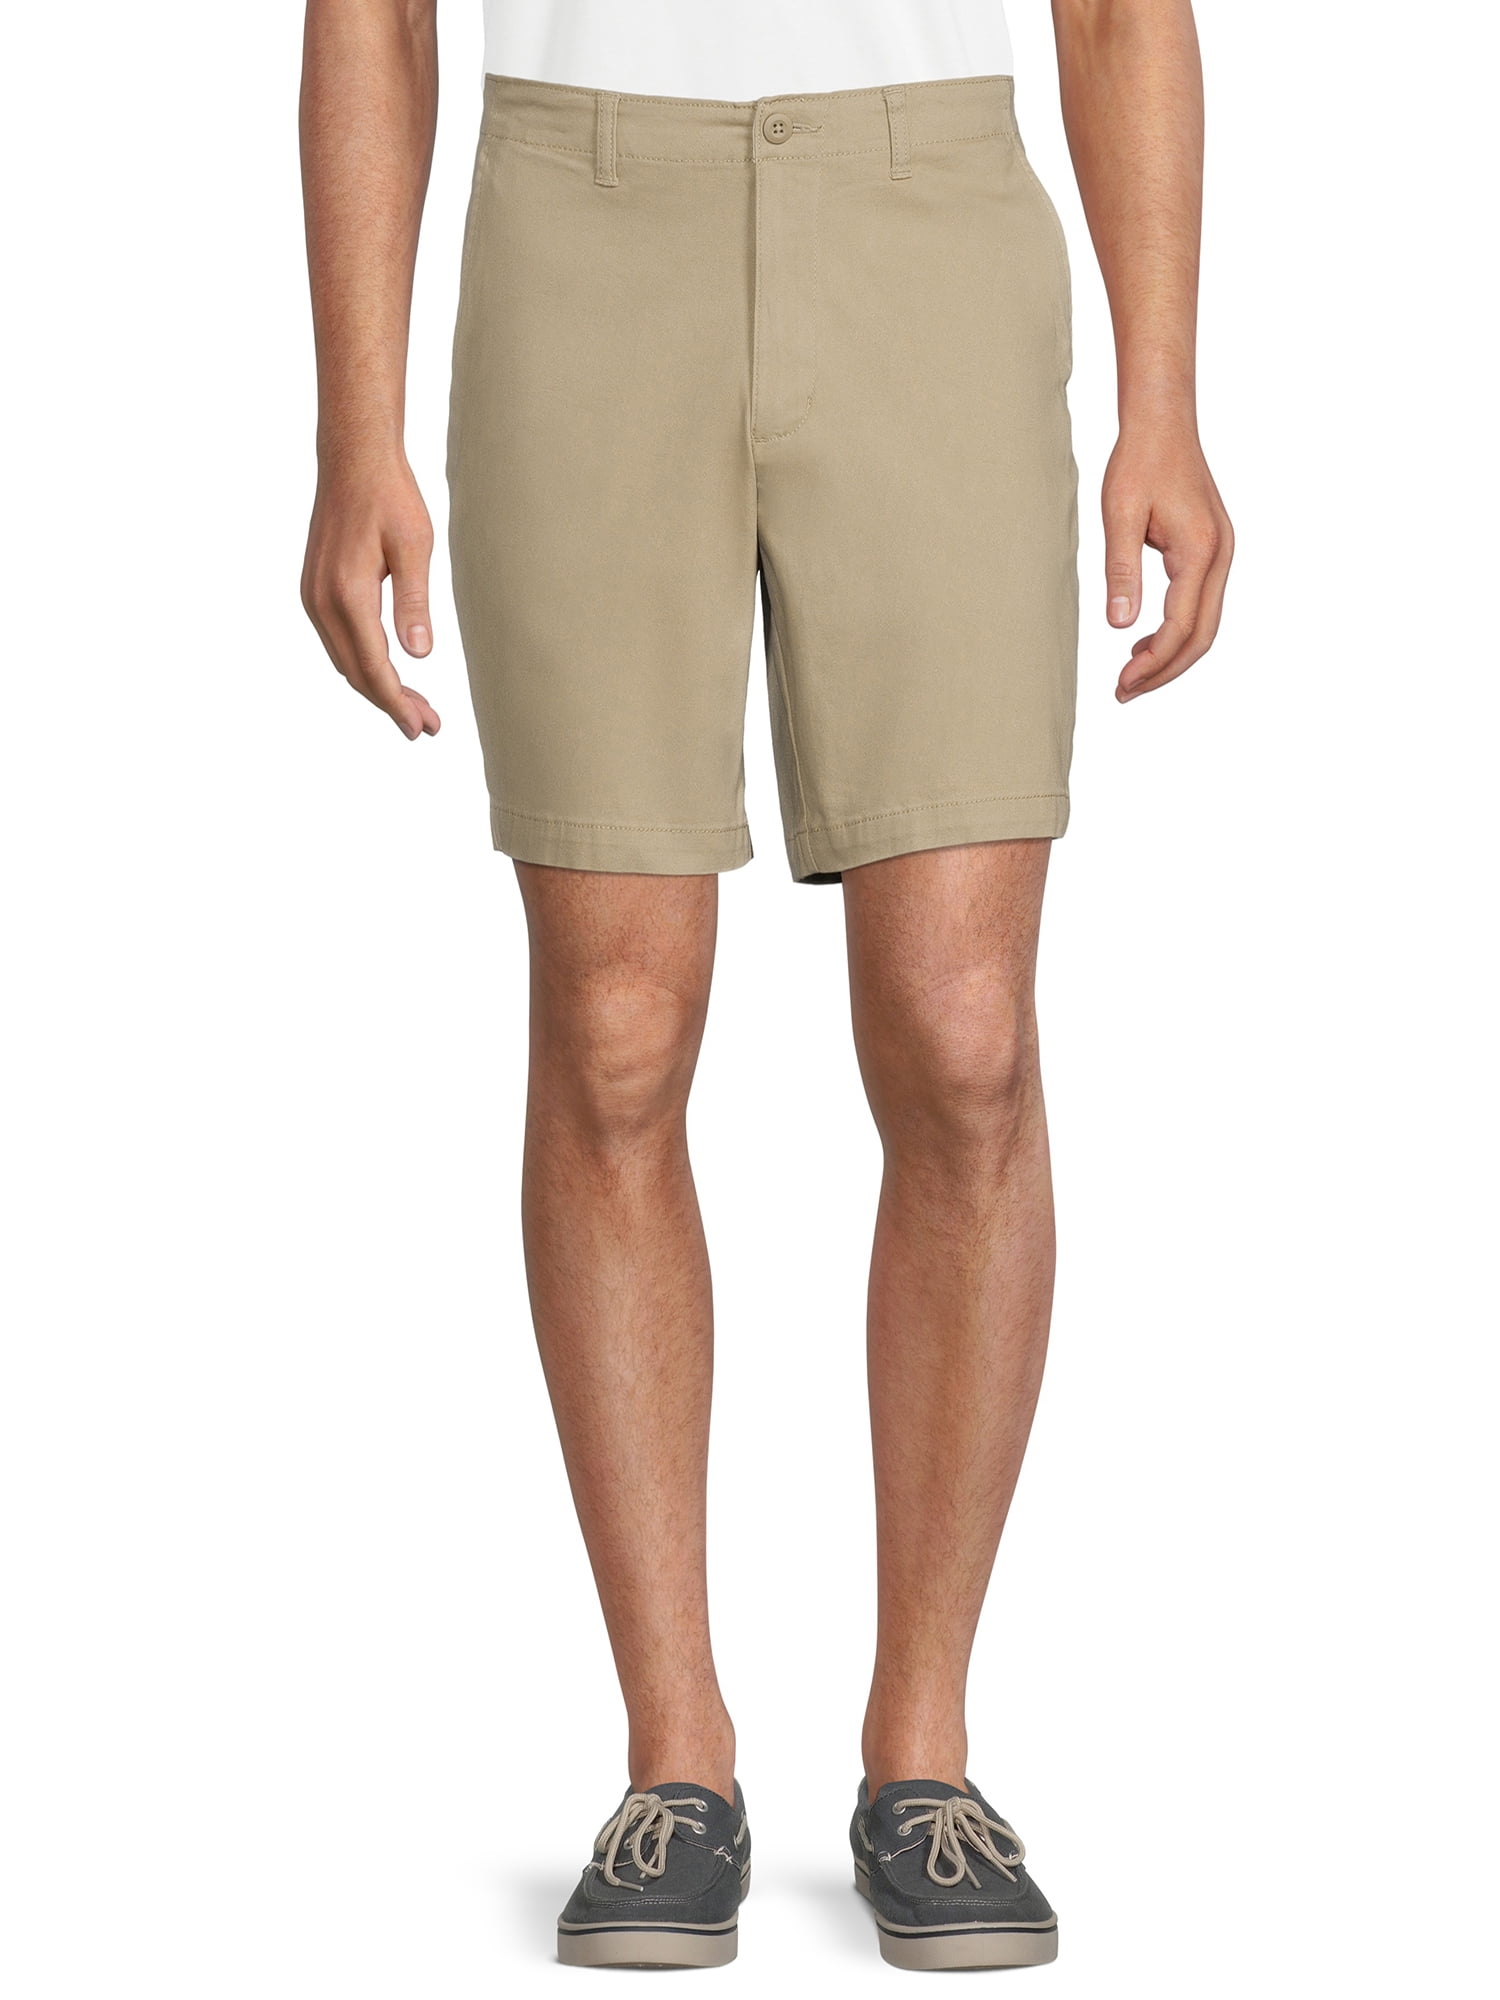 George Men's and Big Men's Flat Front Shorts, 9” Inseam, Sizes 28-54